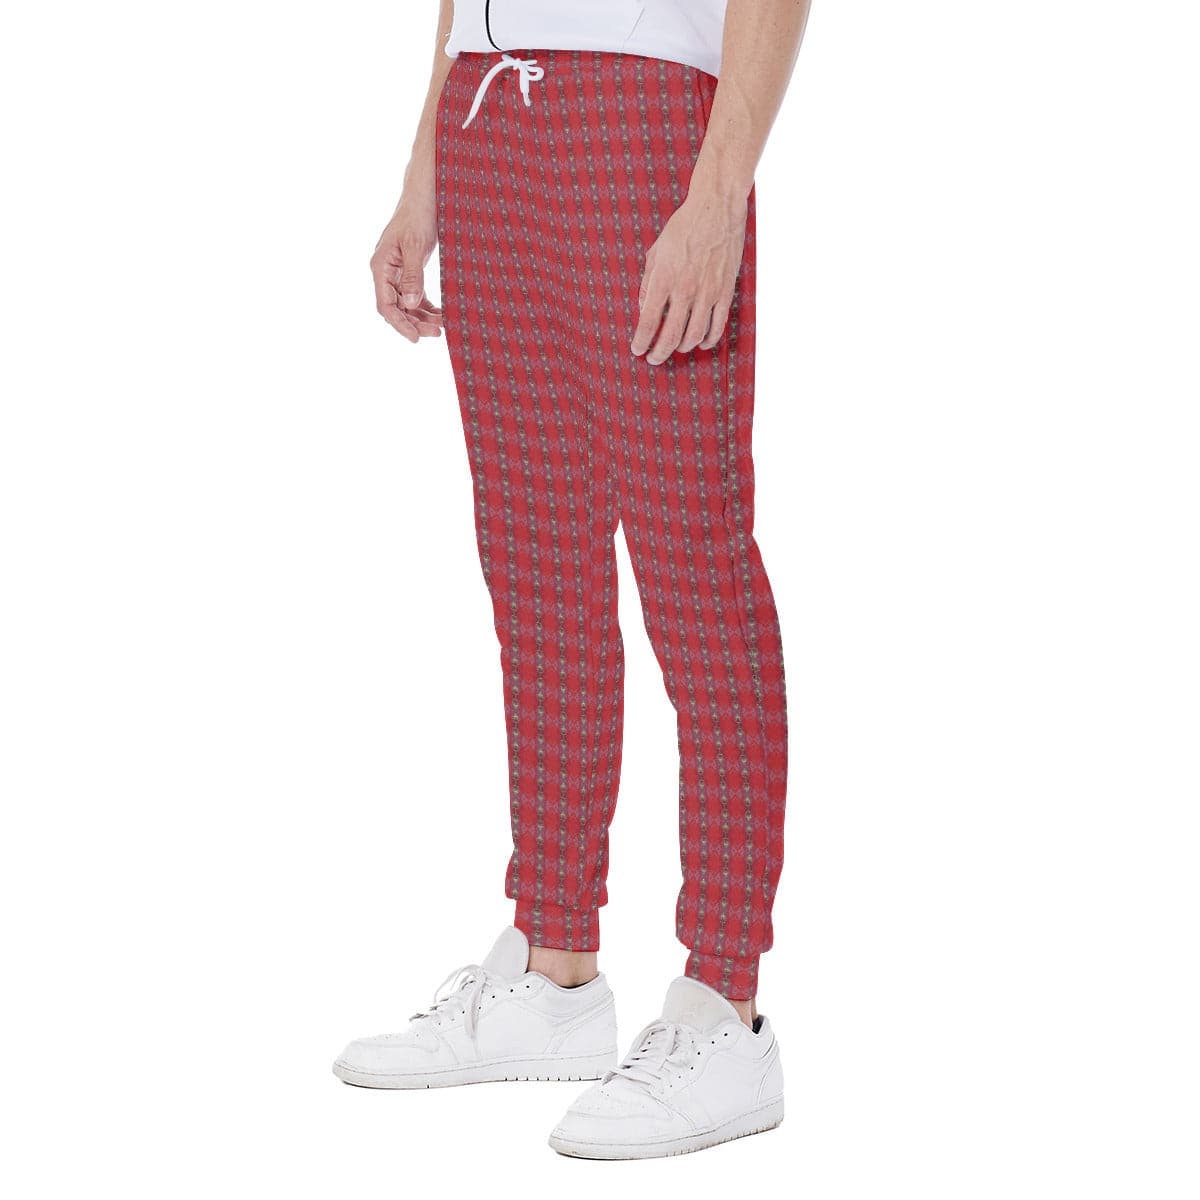 Wine Red and Olive Green patterned Men's Sports and activity Sweatpants, by Sensus Studio Design